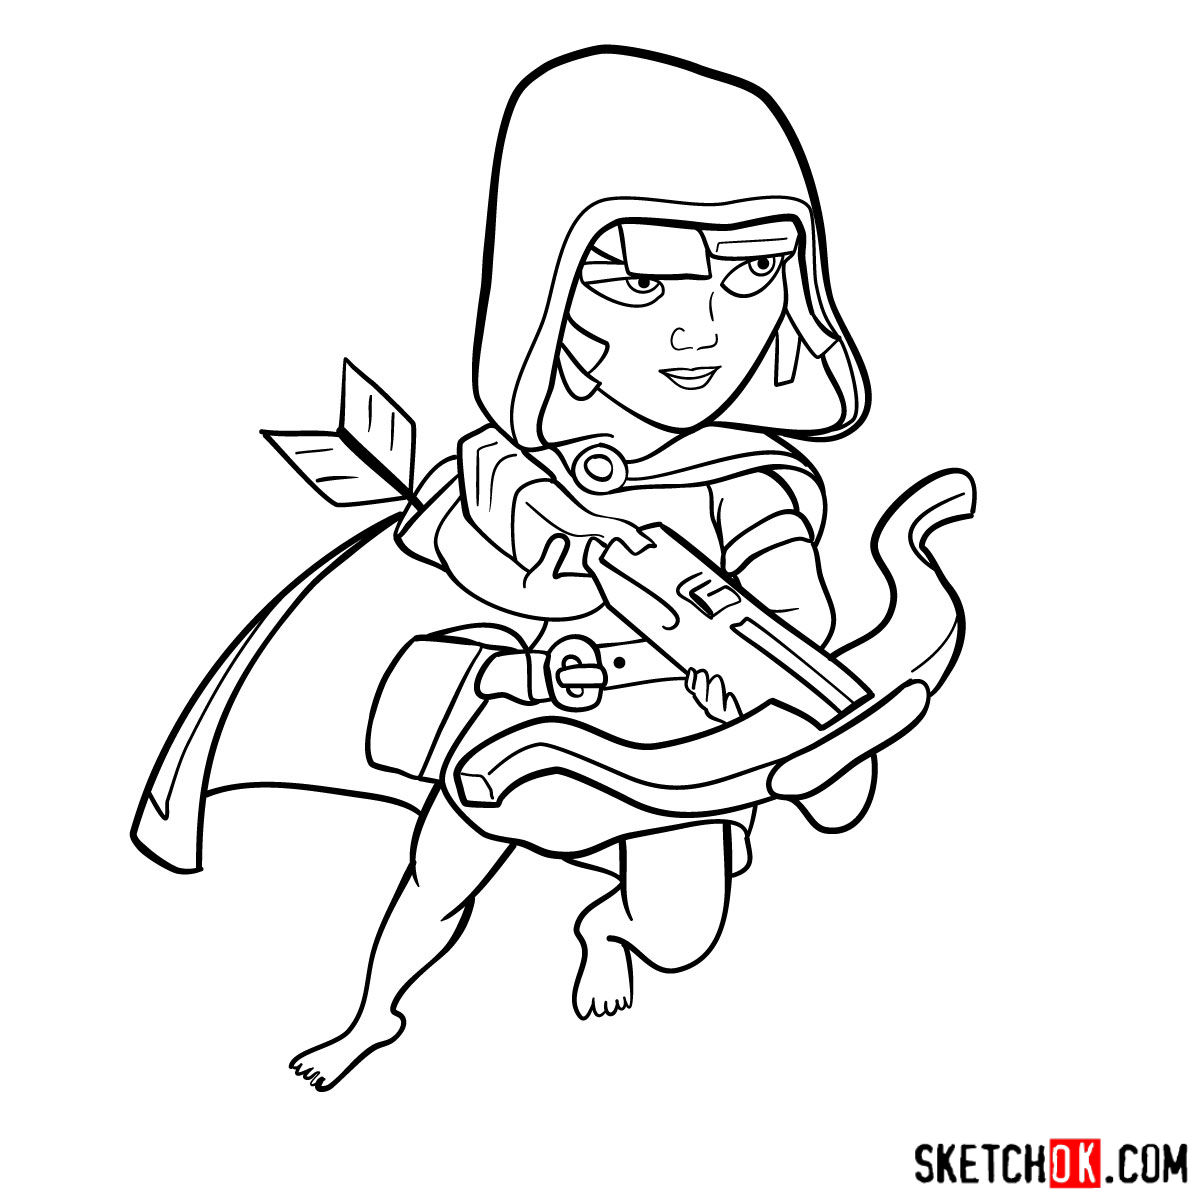 How to draw Sneaky Archer from Clash of Clans - step 10